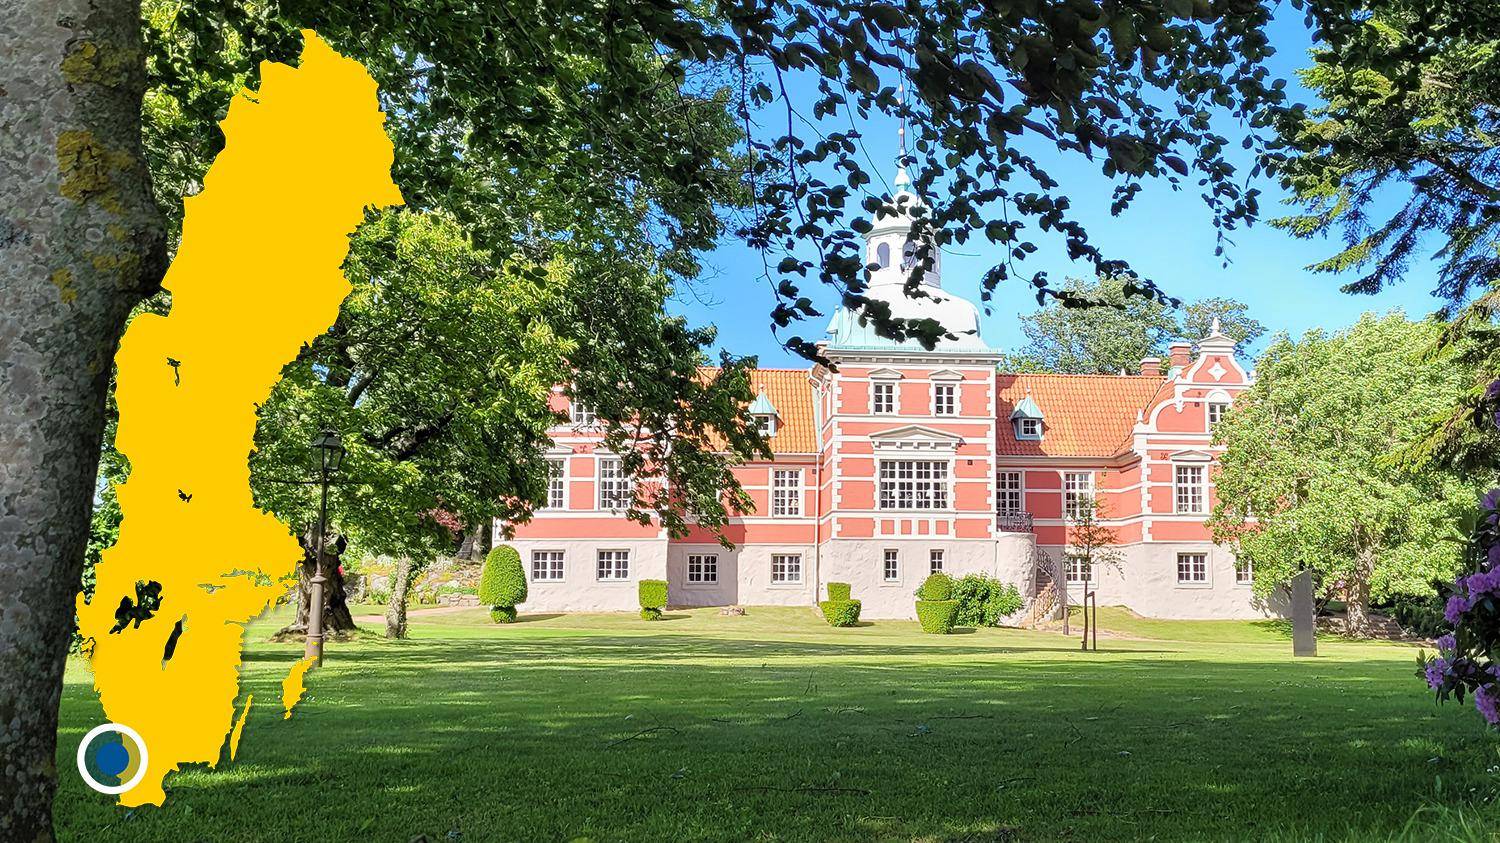 A green lawn with trees and shrubs in front of a mansion with a stone base and red facade. There is a yellow map of Sweden with a blue dot that marks the location of Stubbarp.